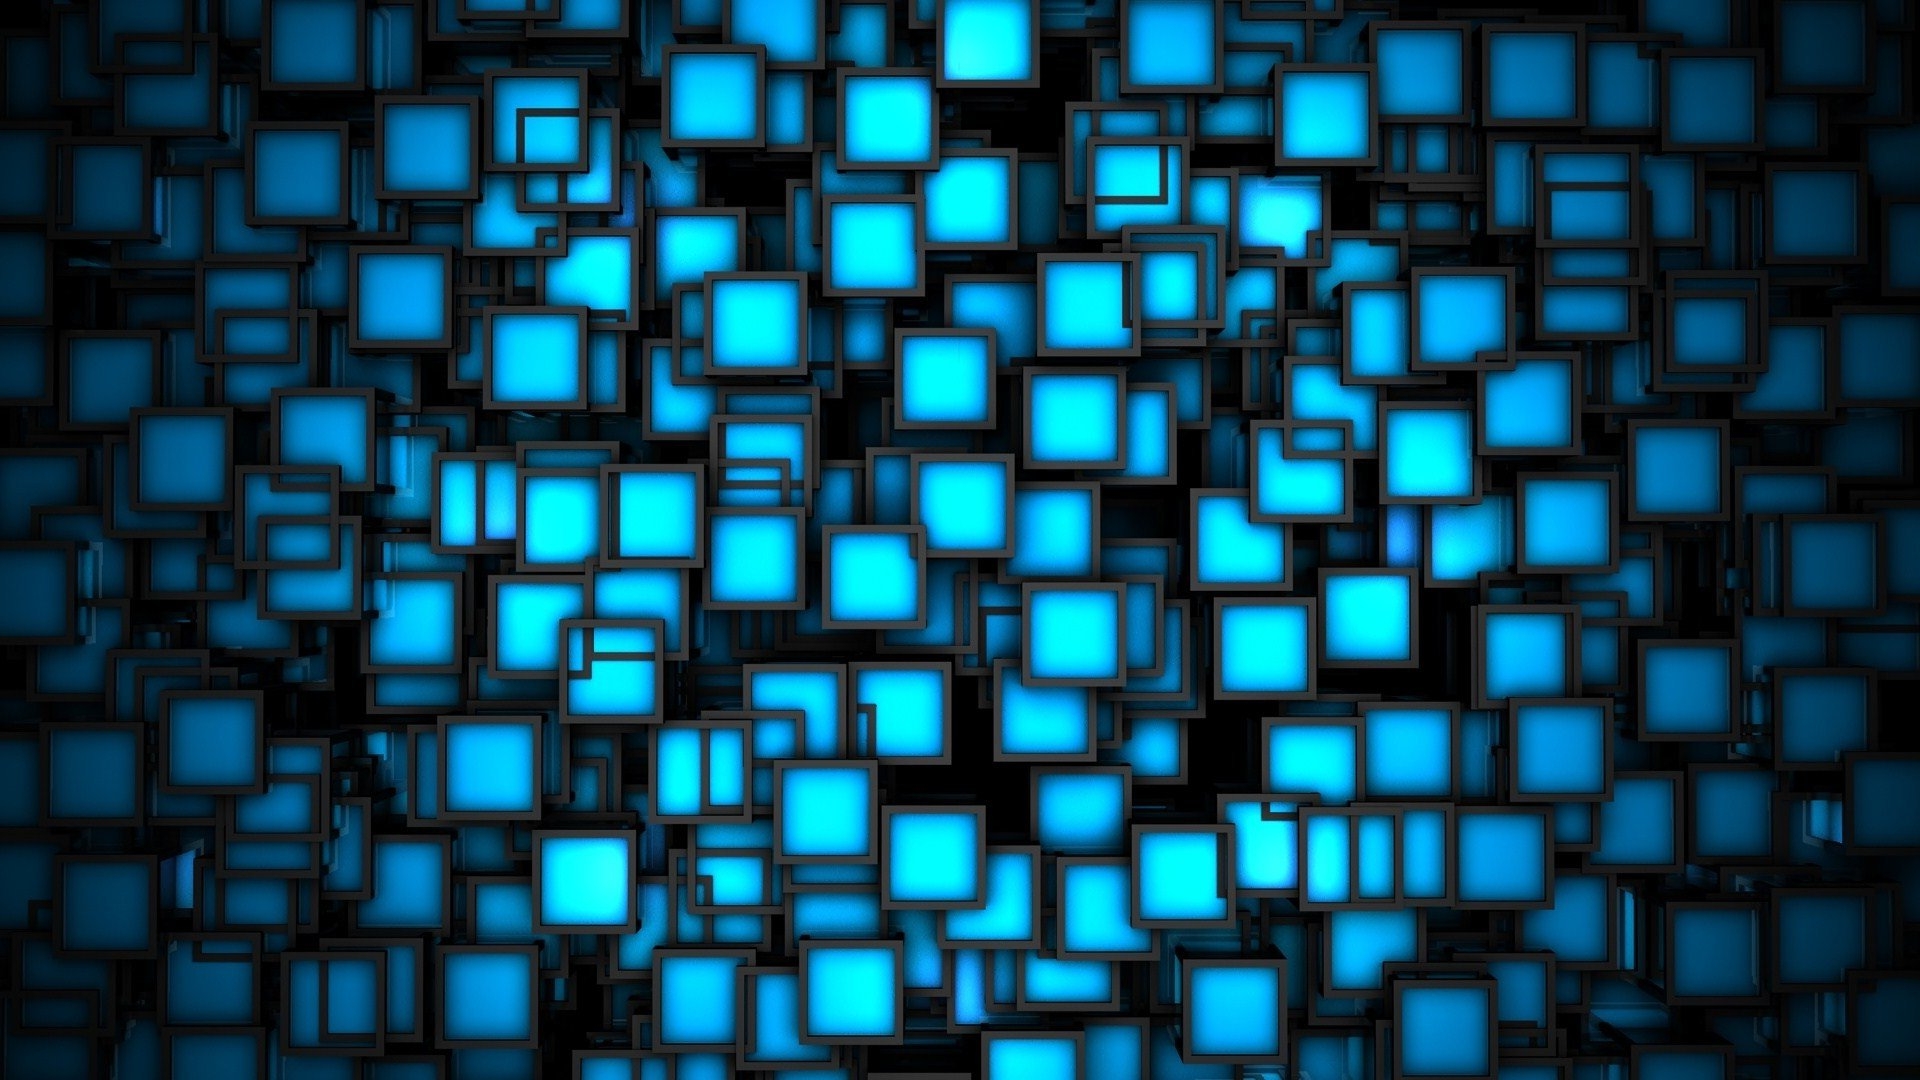 Abstract 3D Pattern Square Wallpaper